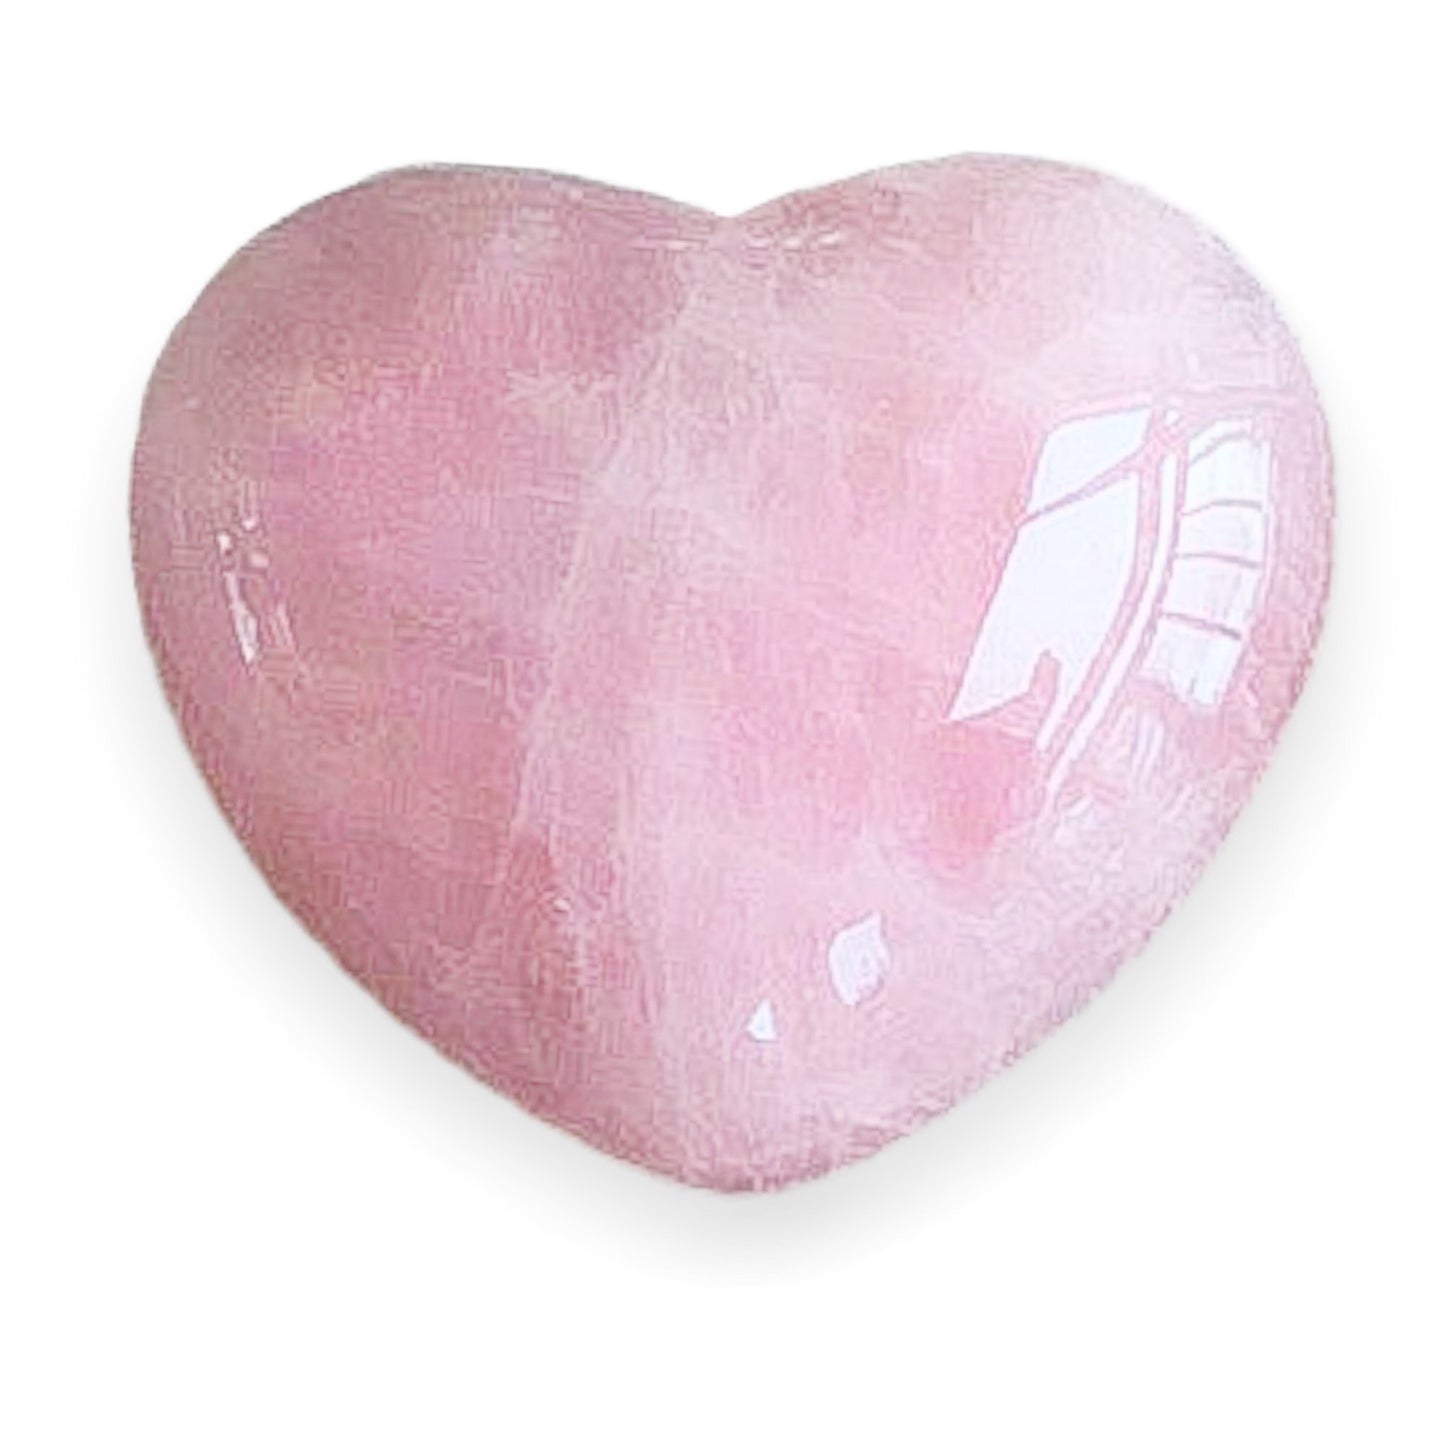 Shop for handmade Gemstone Puffy Hearts 30mm - Carved Heart stones at Magic Crystals. You will receive ONE puffy heart of your choice. Gemstones carving. FREE SHIPPING available. Amethyst, Red jasper, goldstone, aventurine, obsidian, opalite, rose quartz, howlite, mookaite and more.